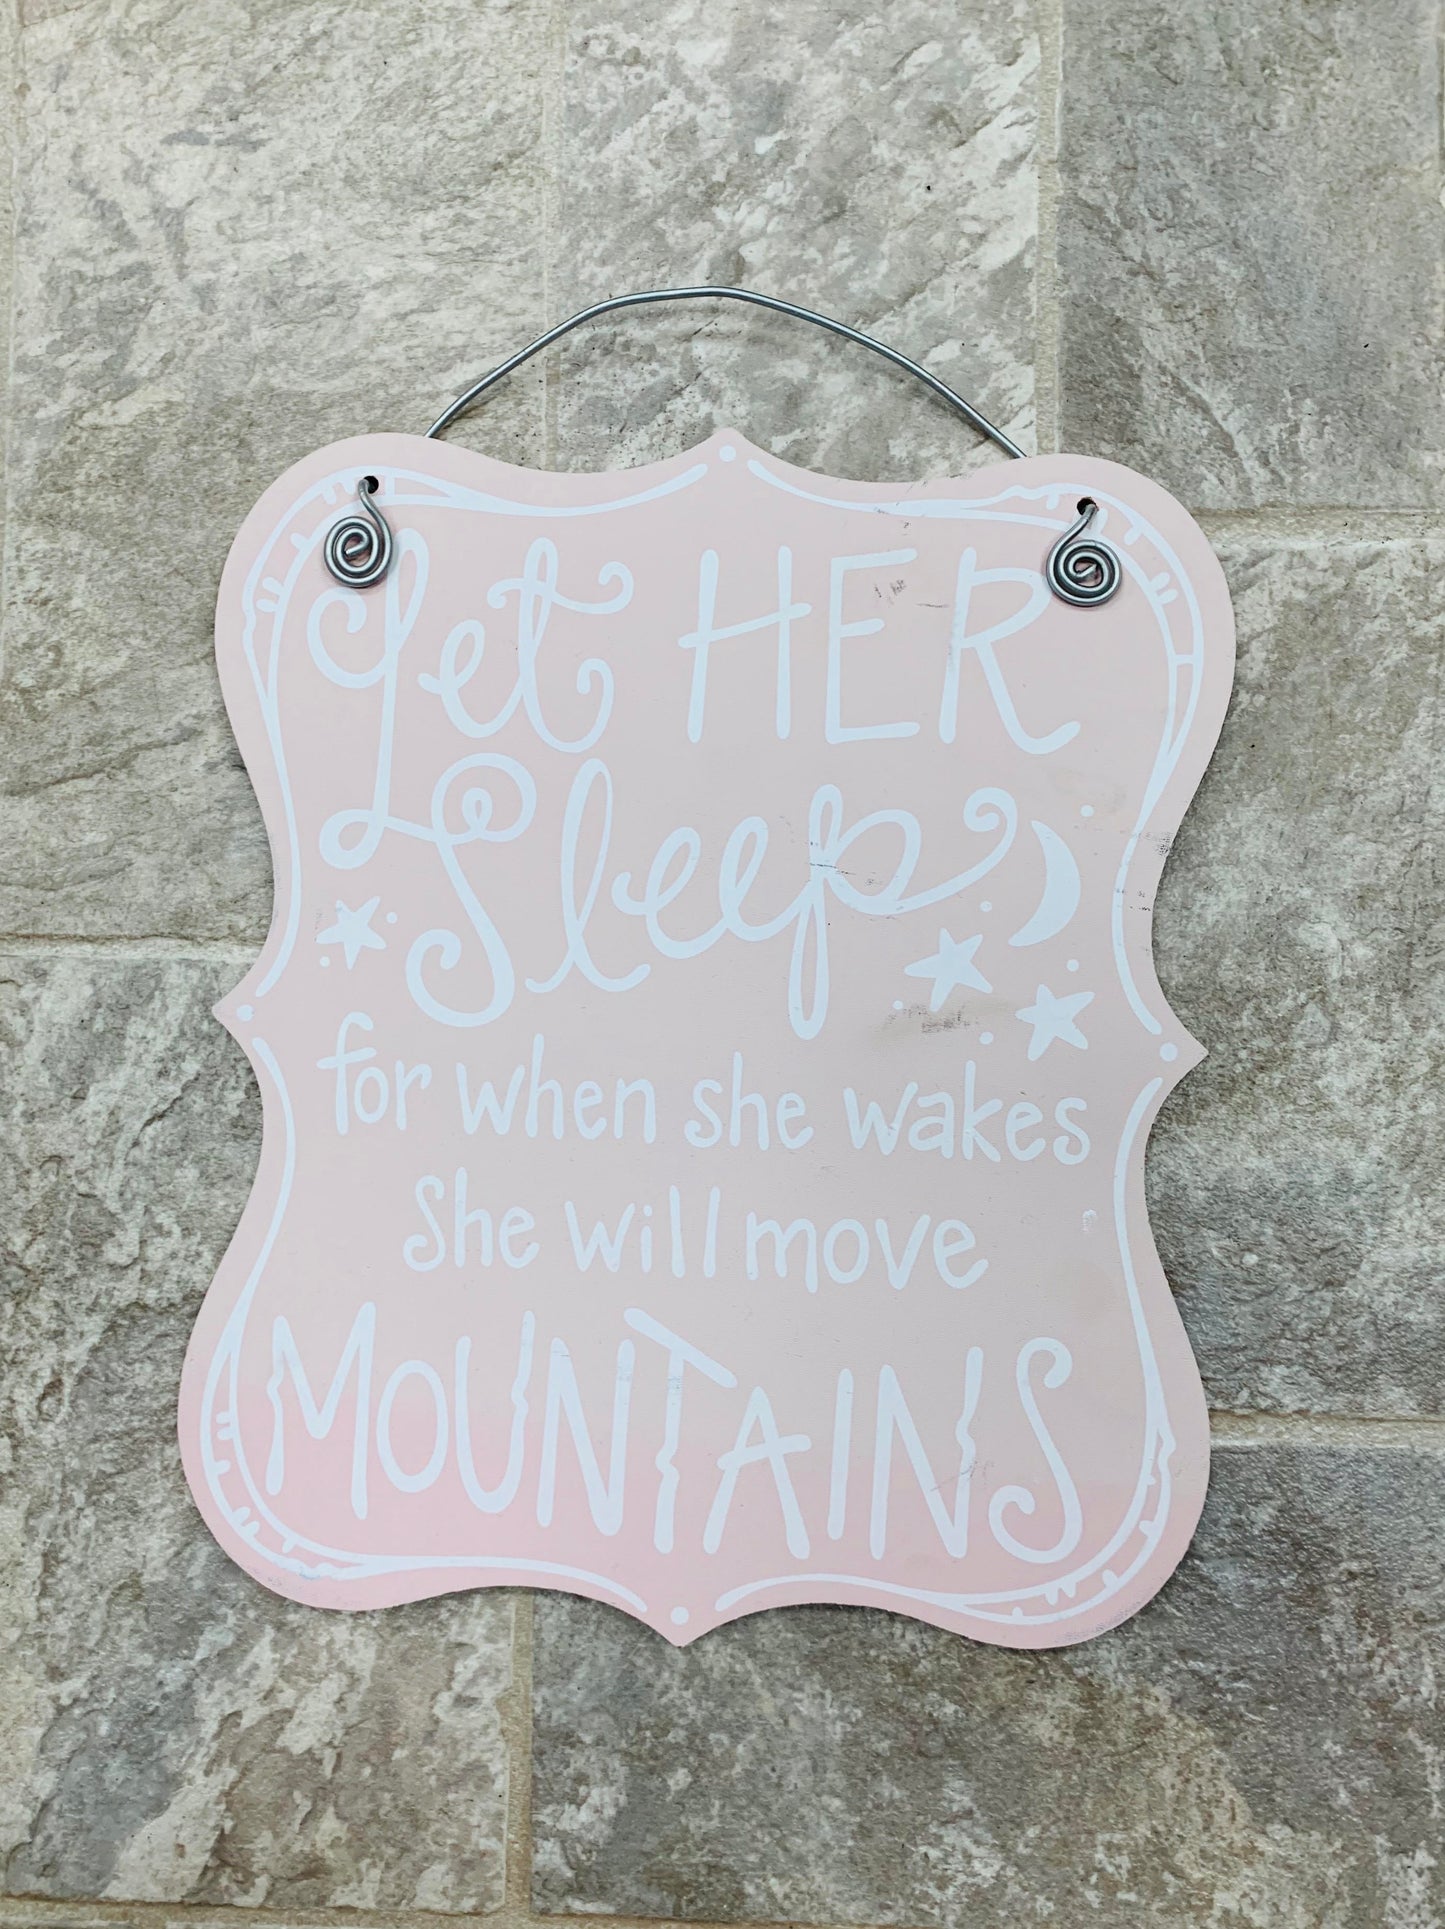 Let Her Sleep Sign